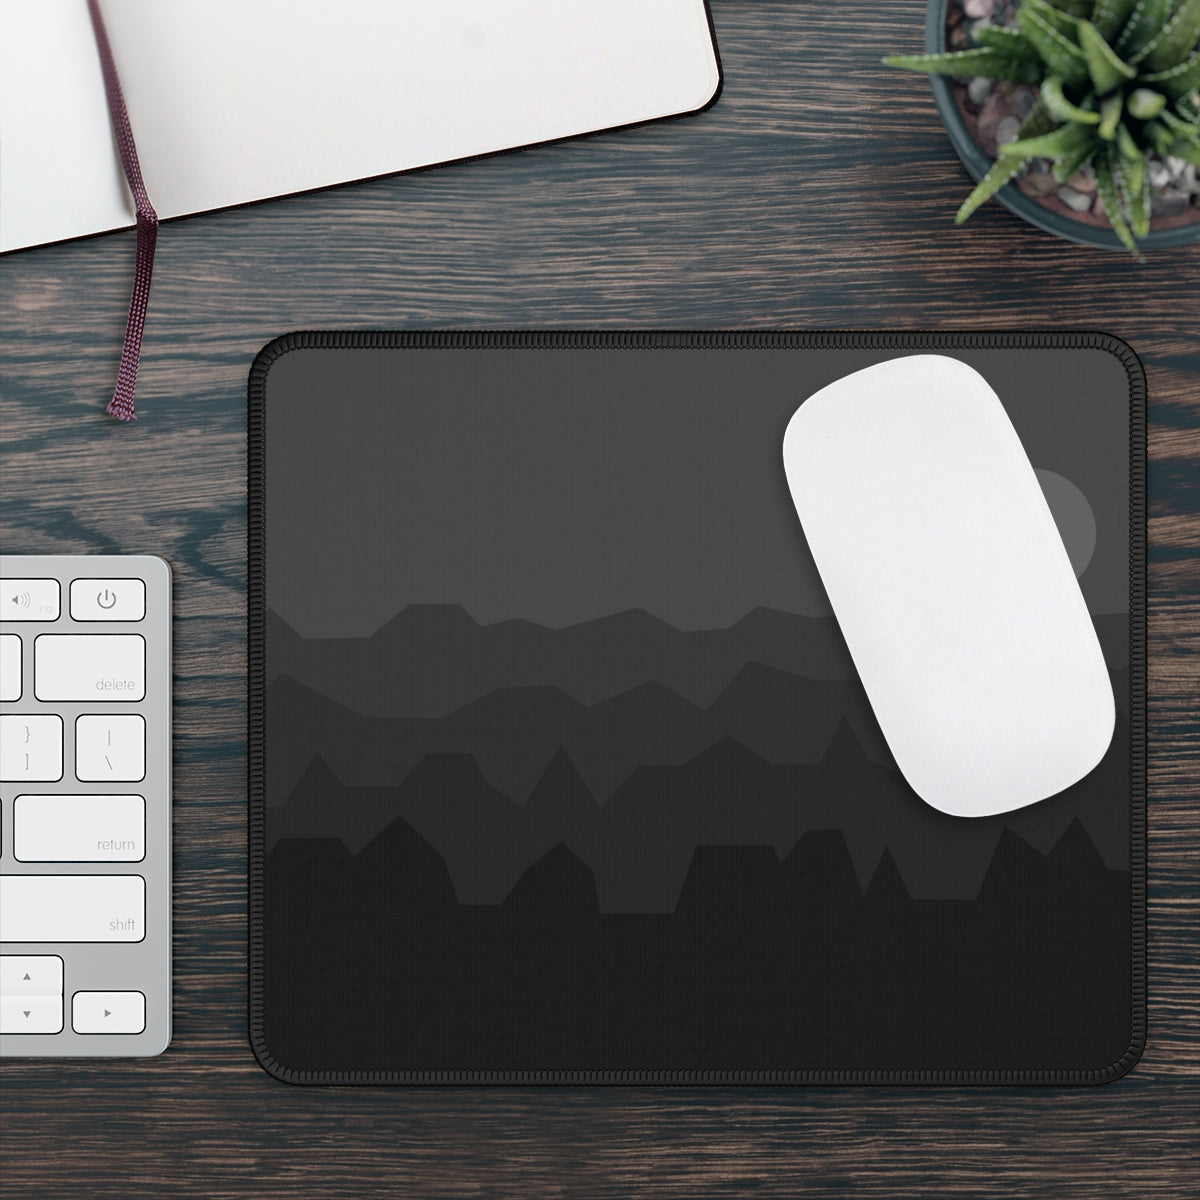 Black & Gray Abstract Mountains Gaming Mouse Pad - Desk Cookies